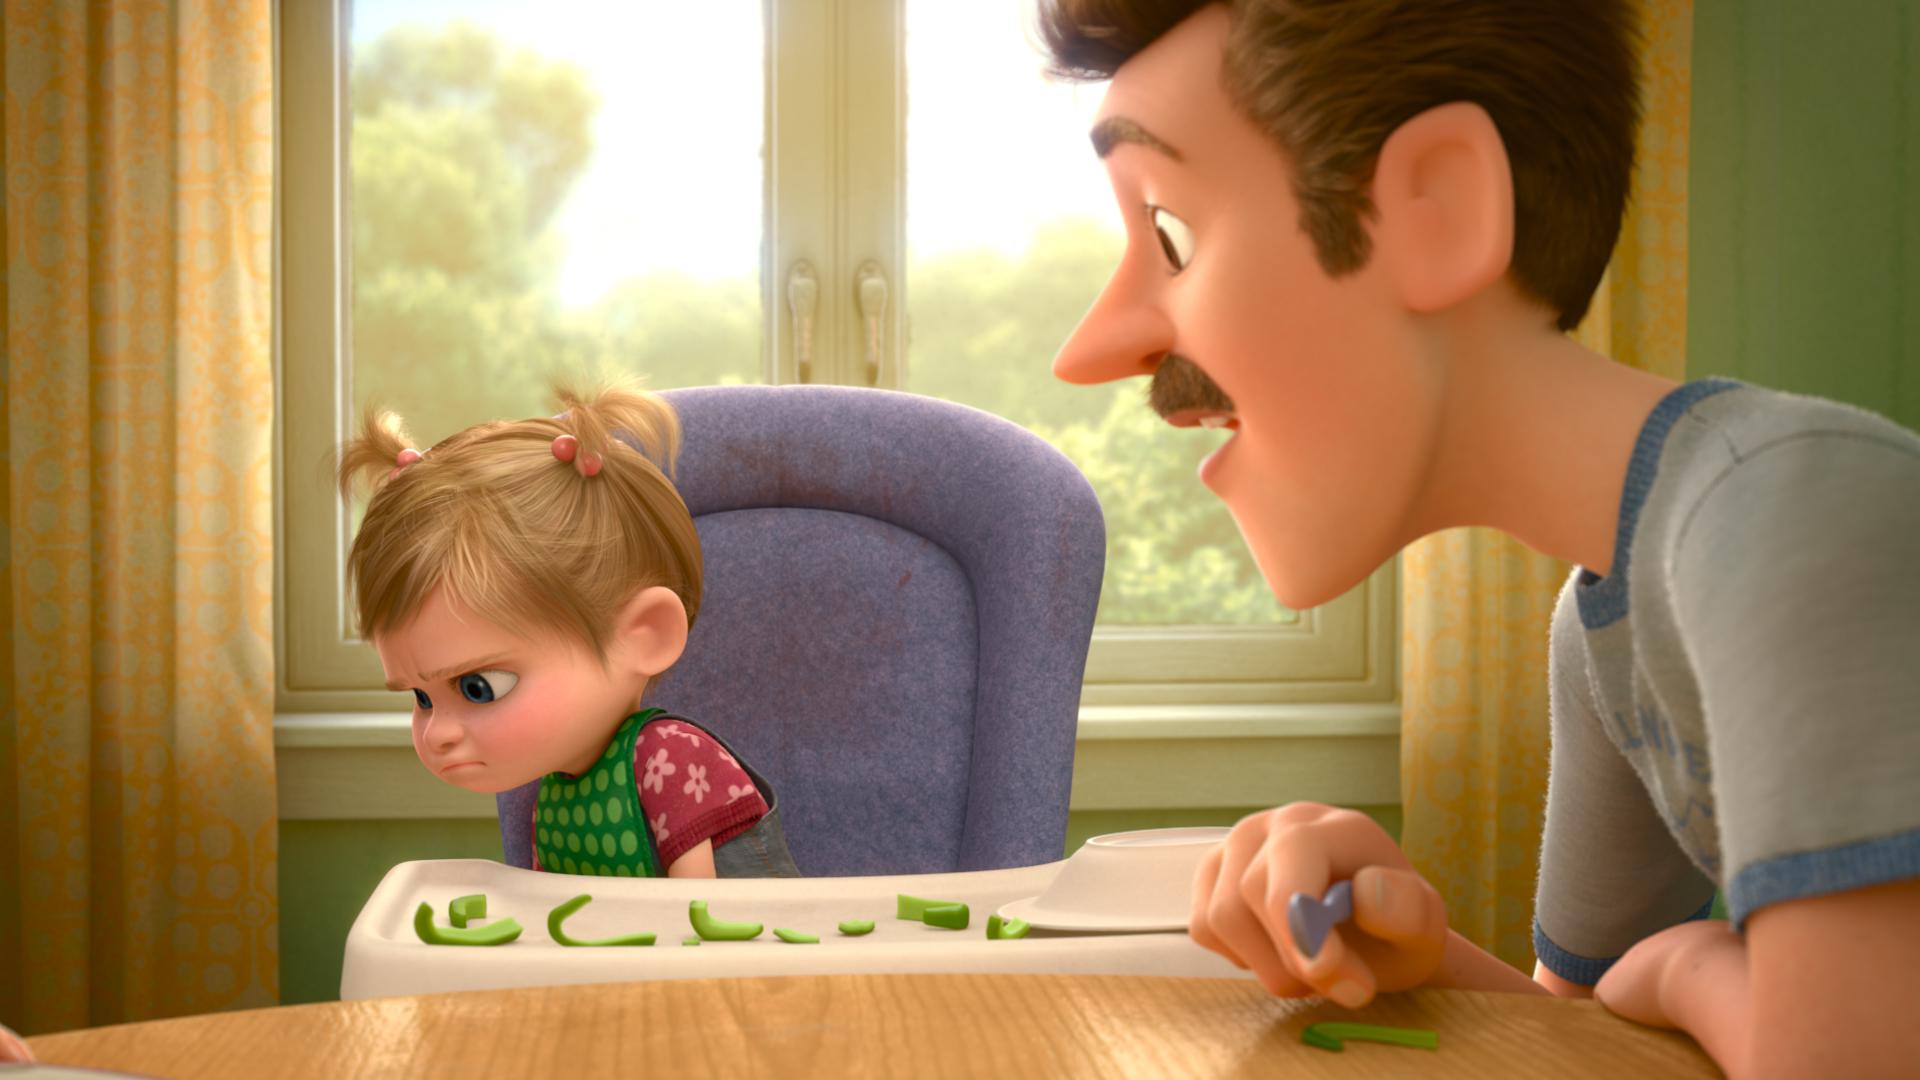 Inside Out Director Pete Docter Explains Why Pixar Re Animated Certain Scenes (like The Broccoli Scene) For International Audiences